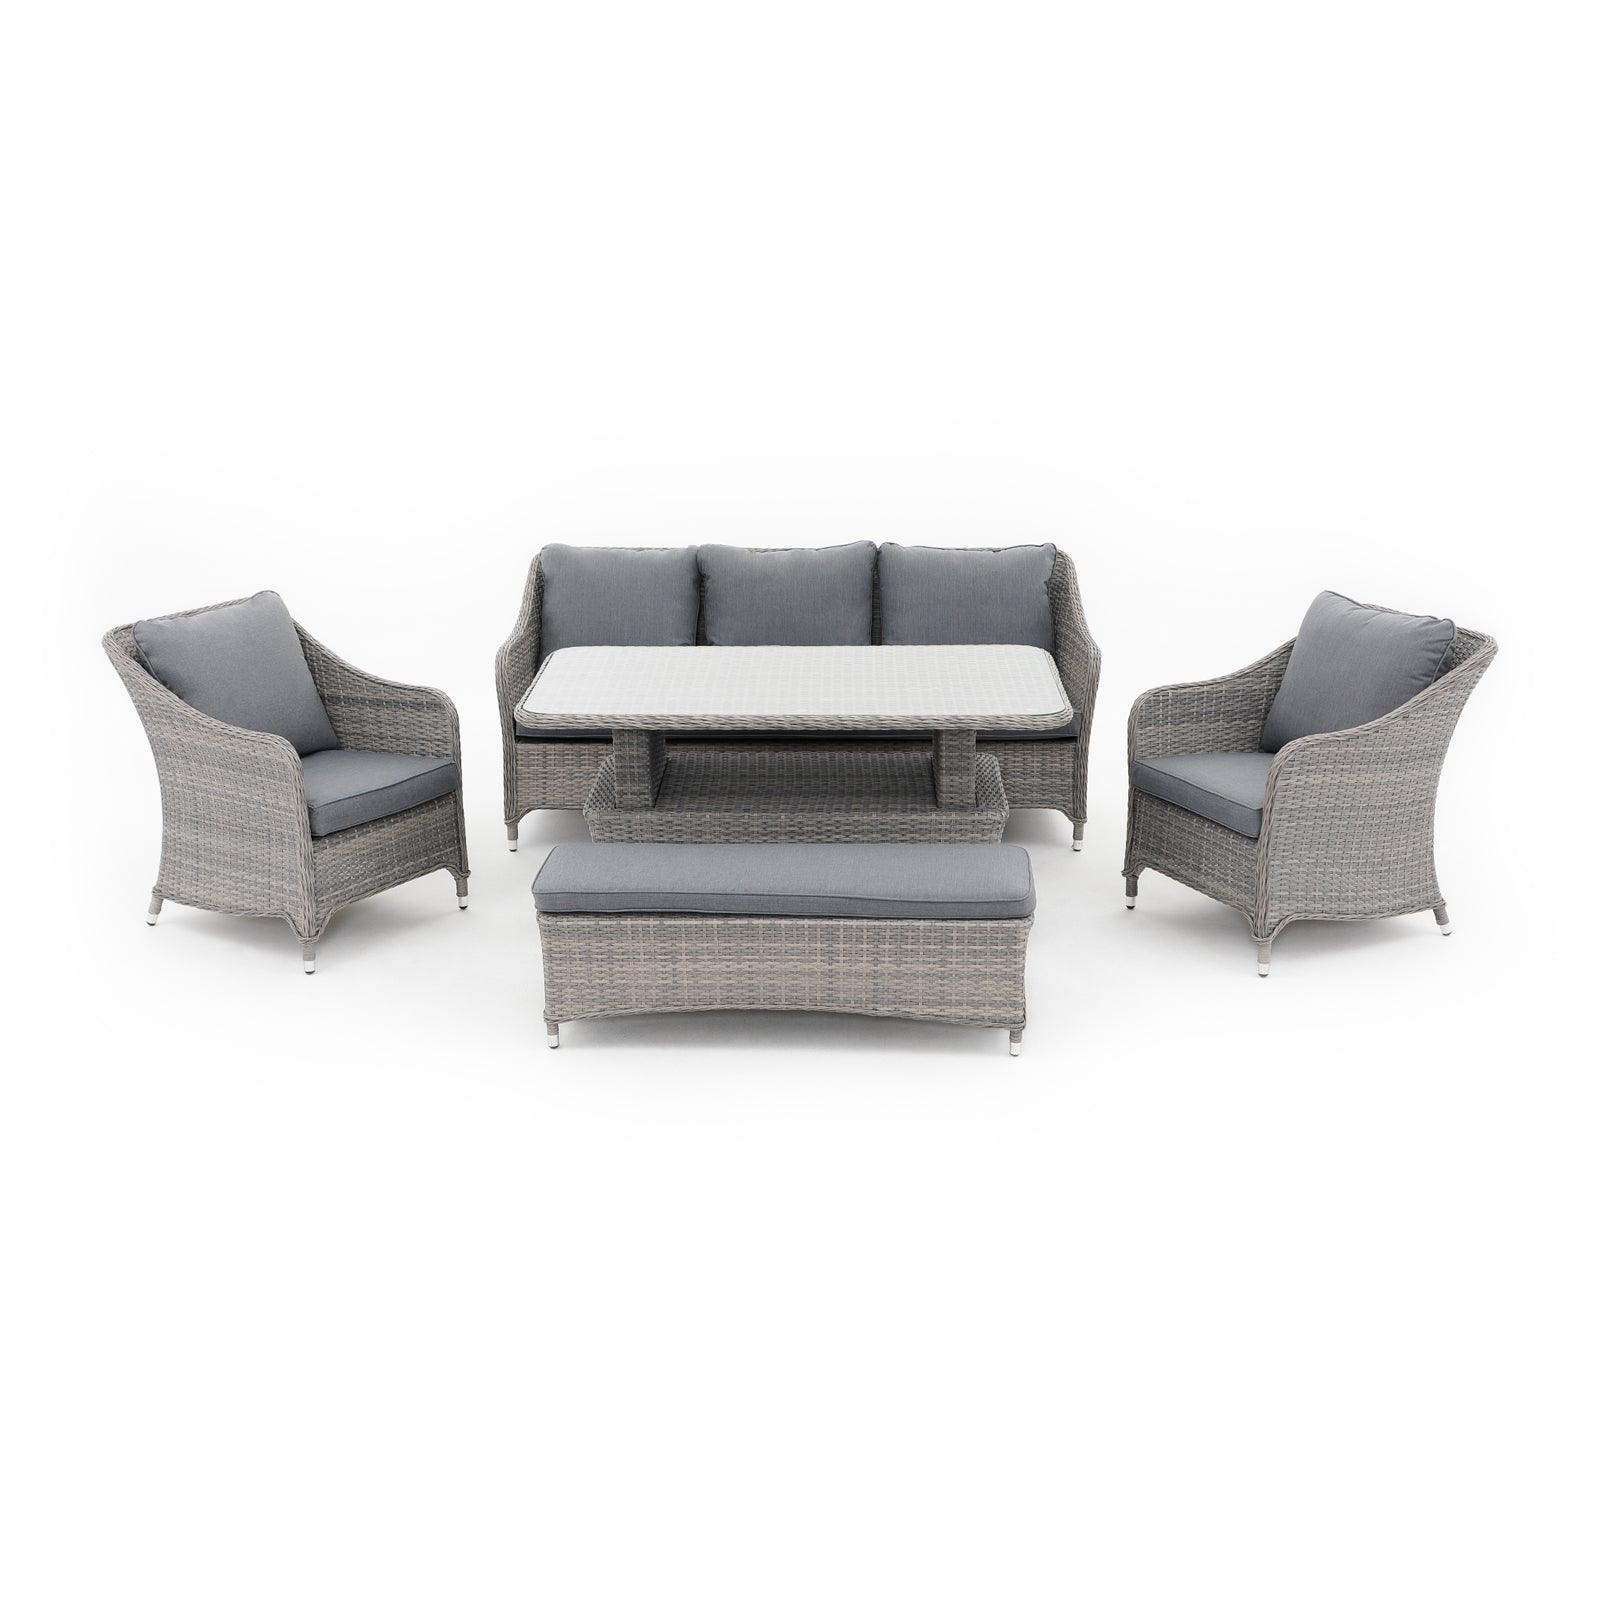 Irati 5-Piece grey wicker outdoor dining set with aluminum frame, grey cushions, 1 three-seater sofa, 2 dining chairs , 1 ottoman, 1 lift top table - Jardina Furniture - 2#color_Grey